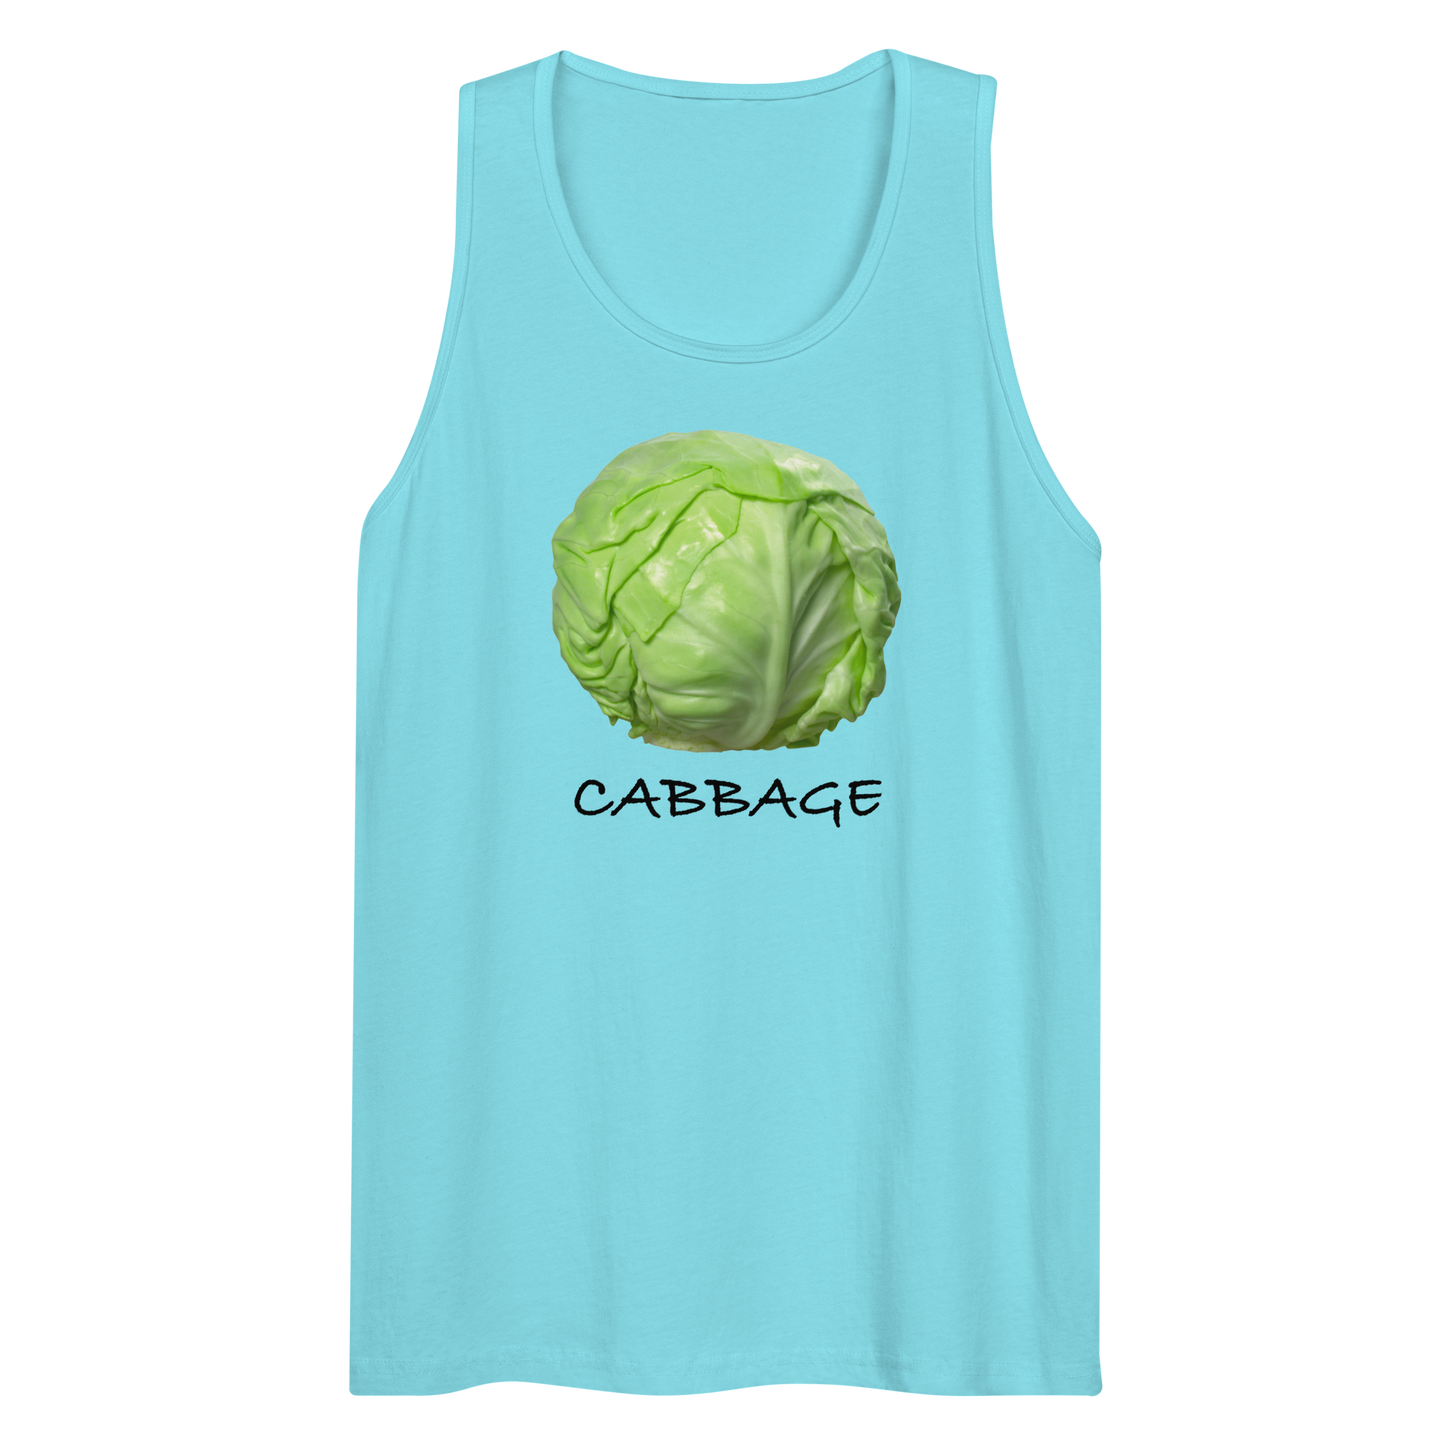 Cabbage Tank Top